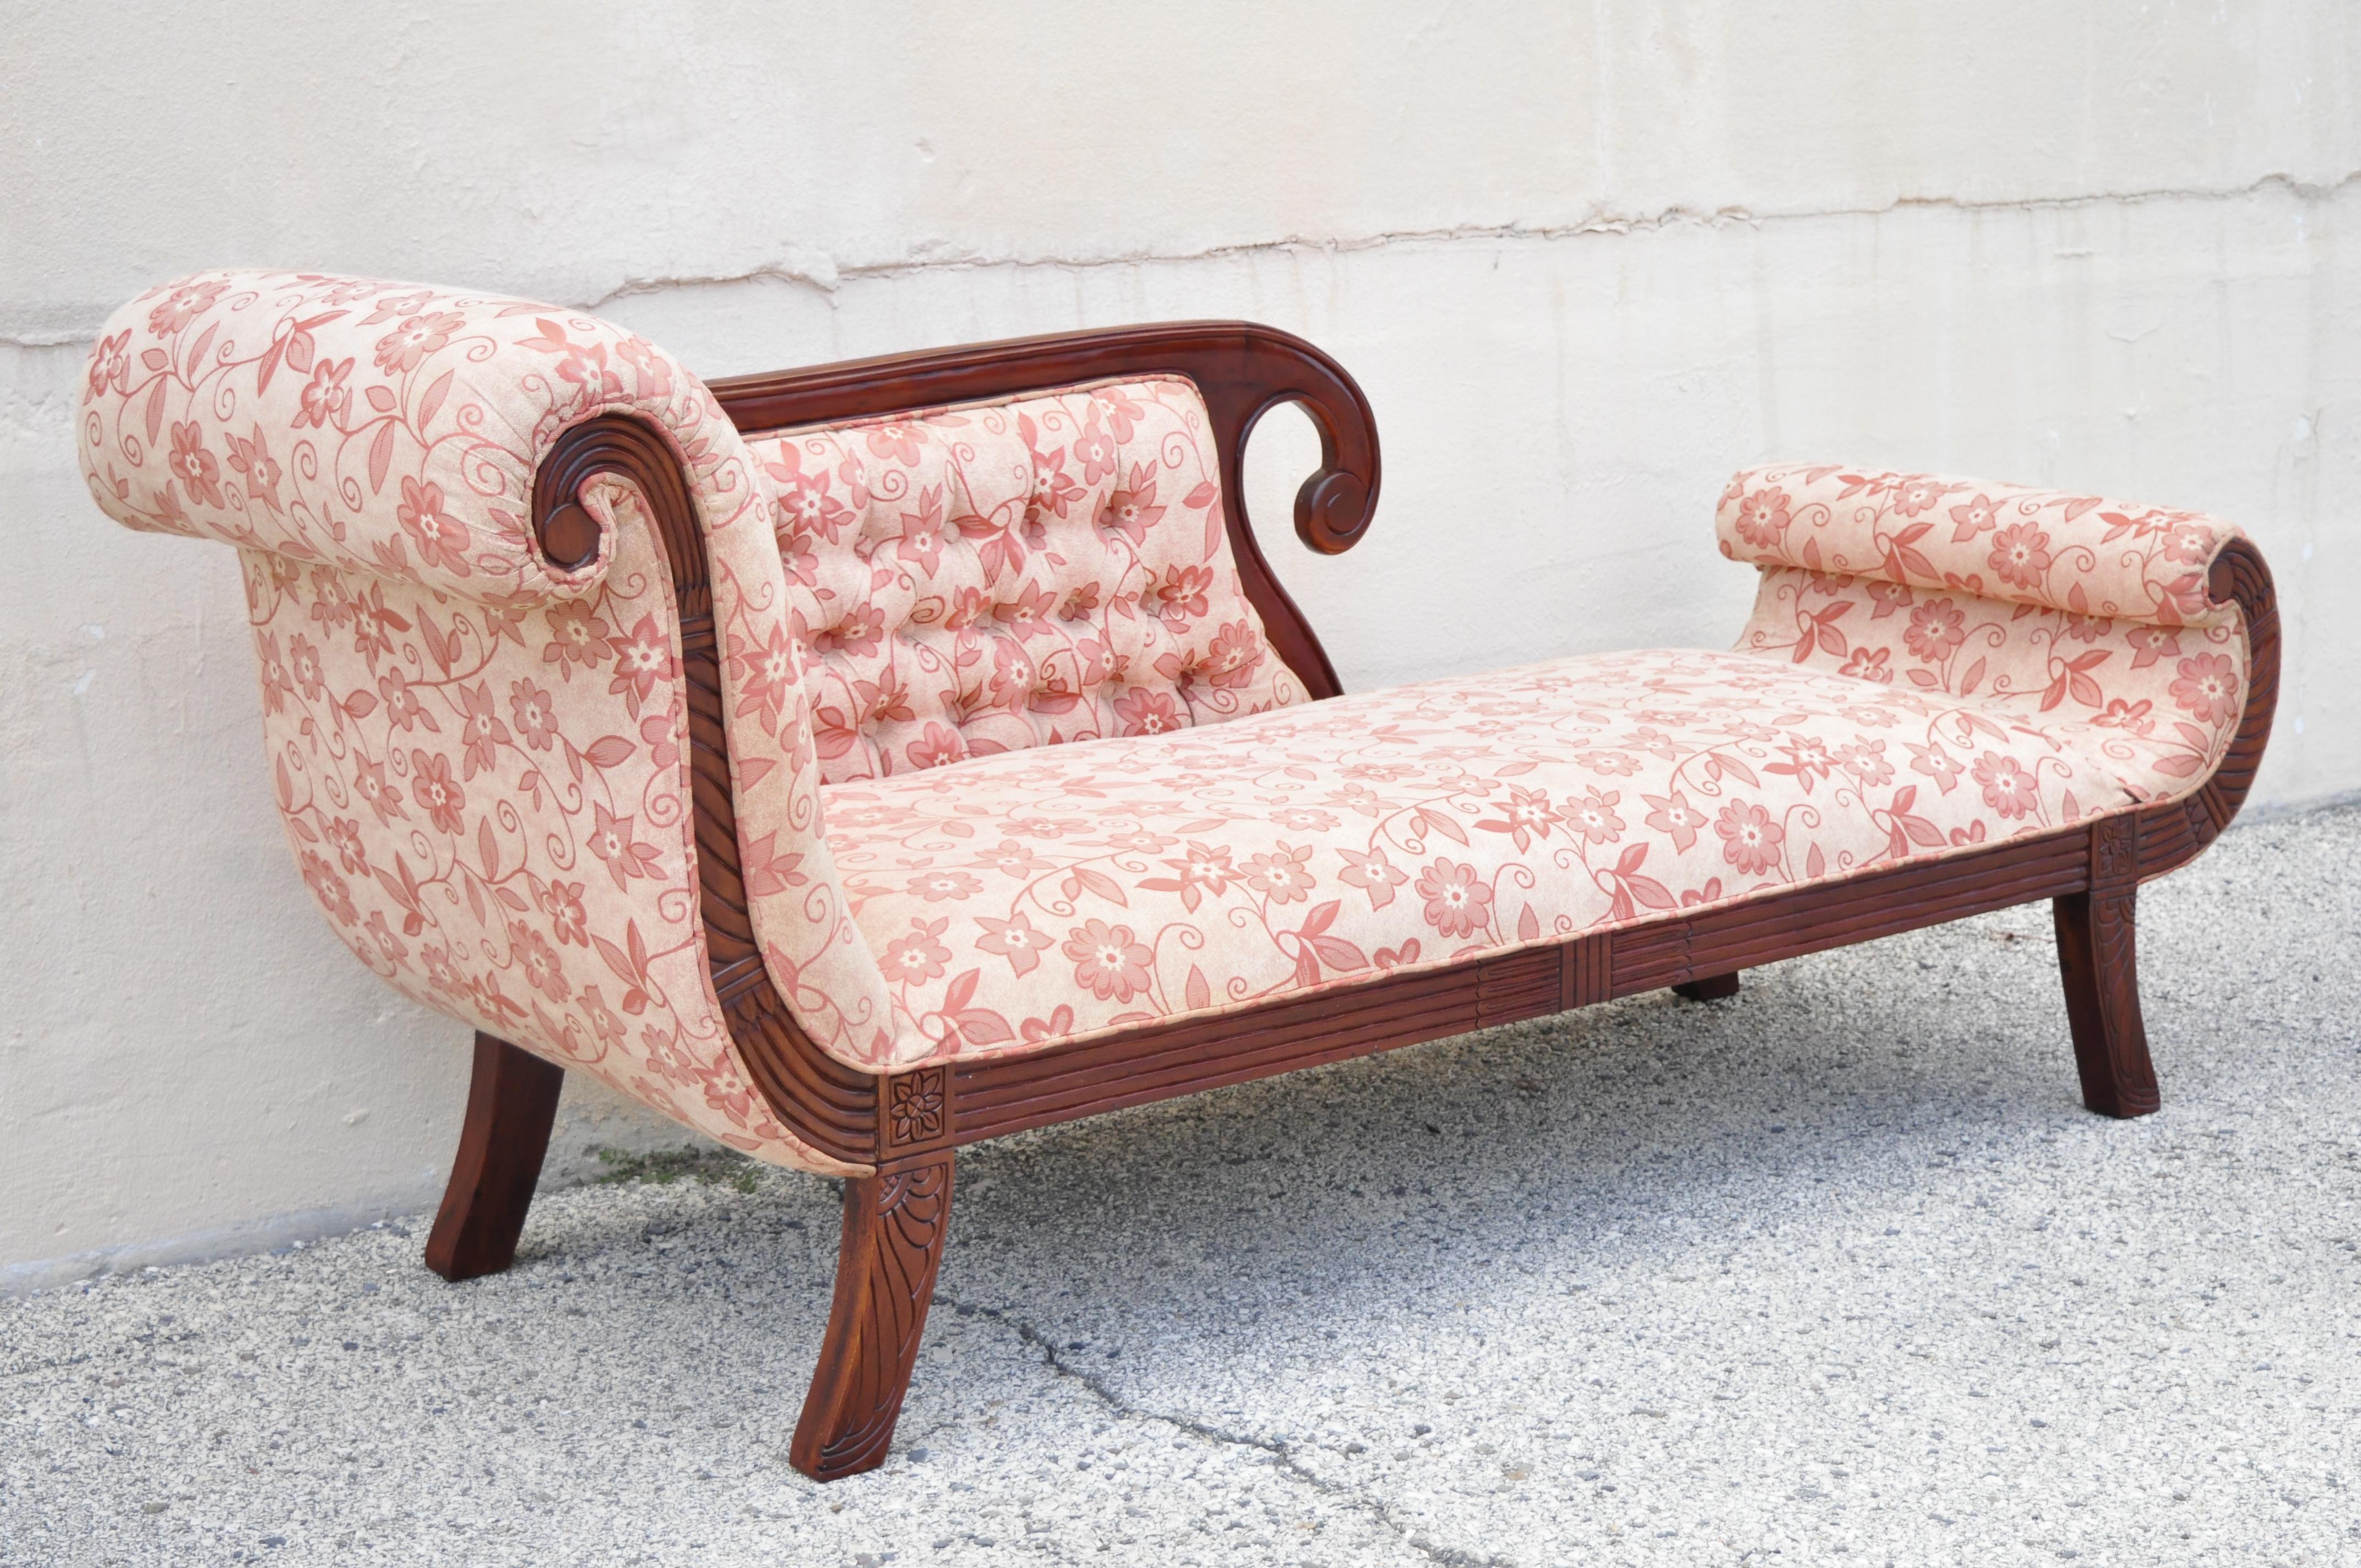 Late 20th century mahogany frame American Empire style fainting couch sofa chaise lounge. Item features pink tufted upholstery, carved scrollwork frame, solid wood frame, beautiful wood grain, nicely carved details, great style and form, circa late